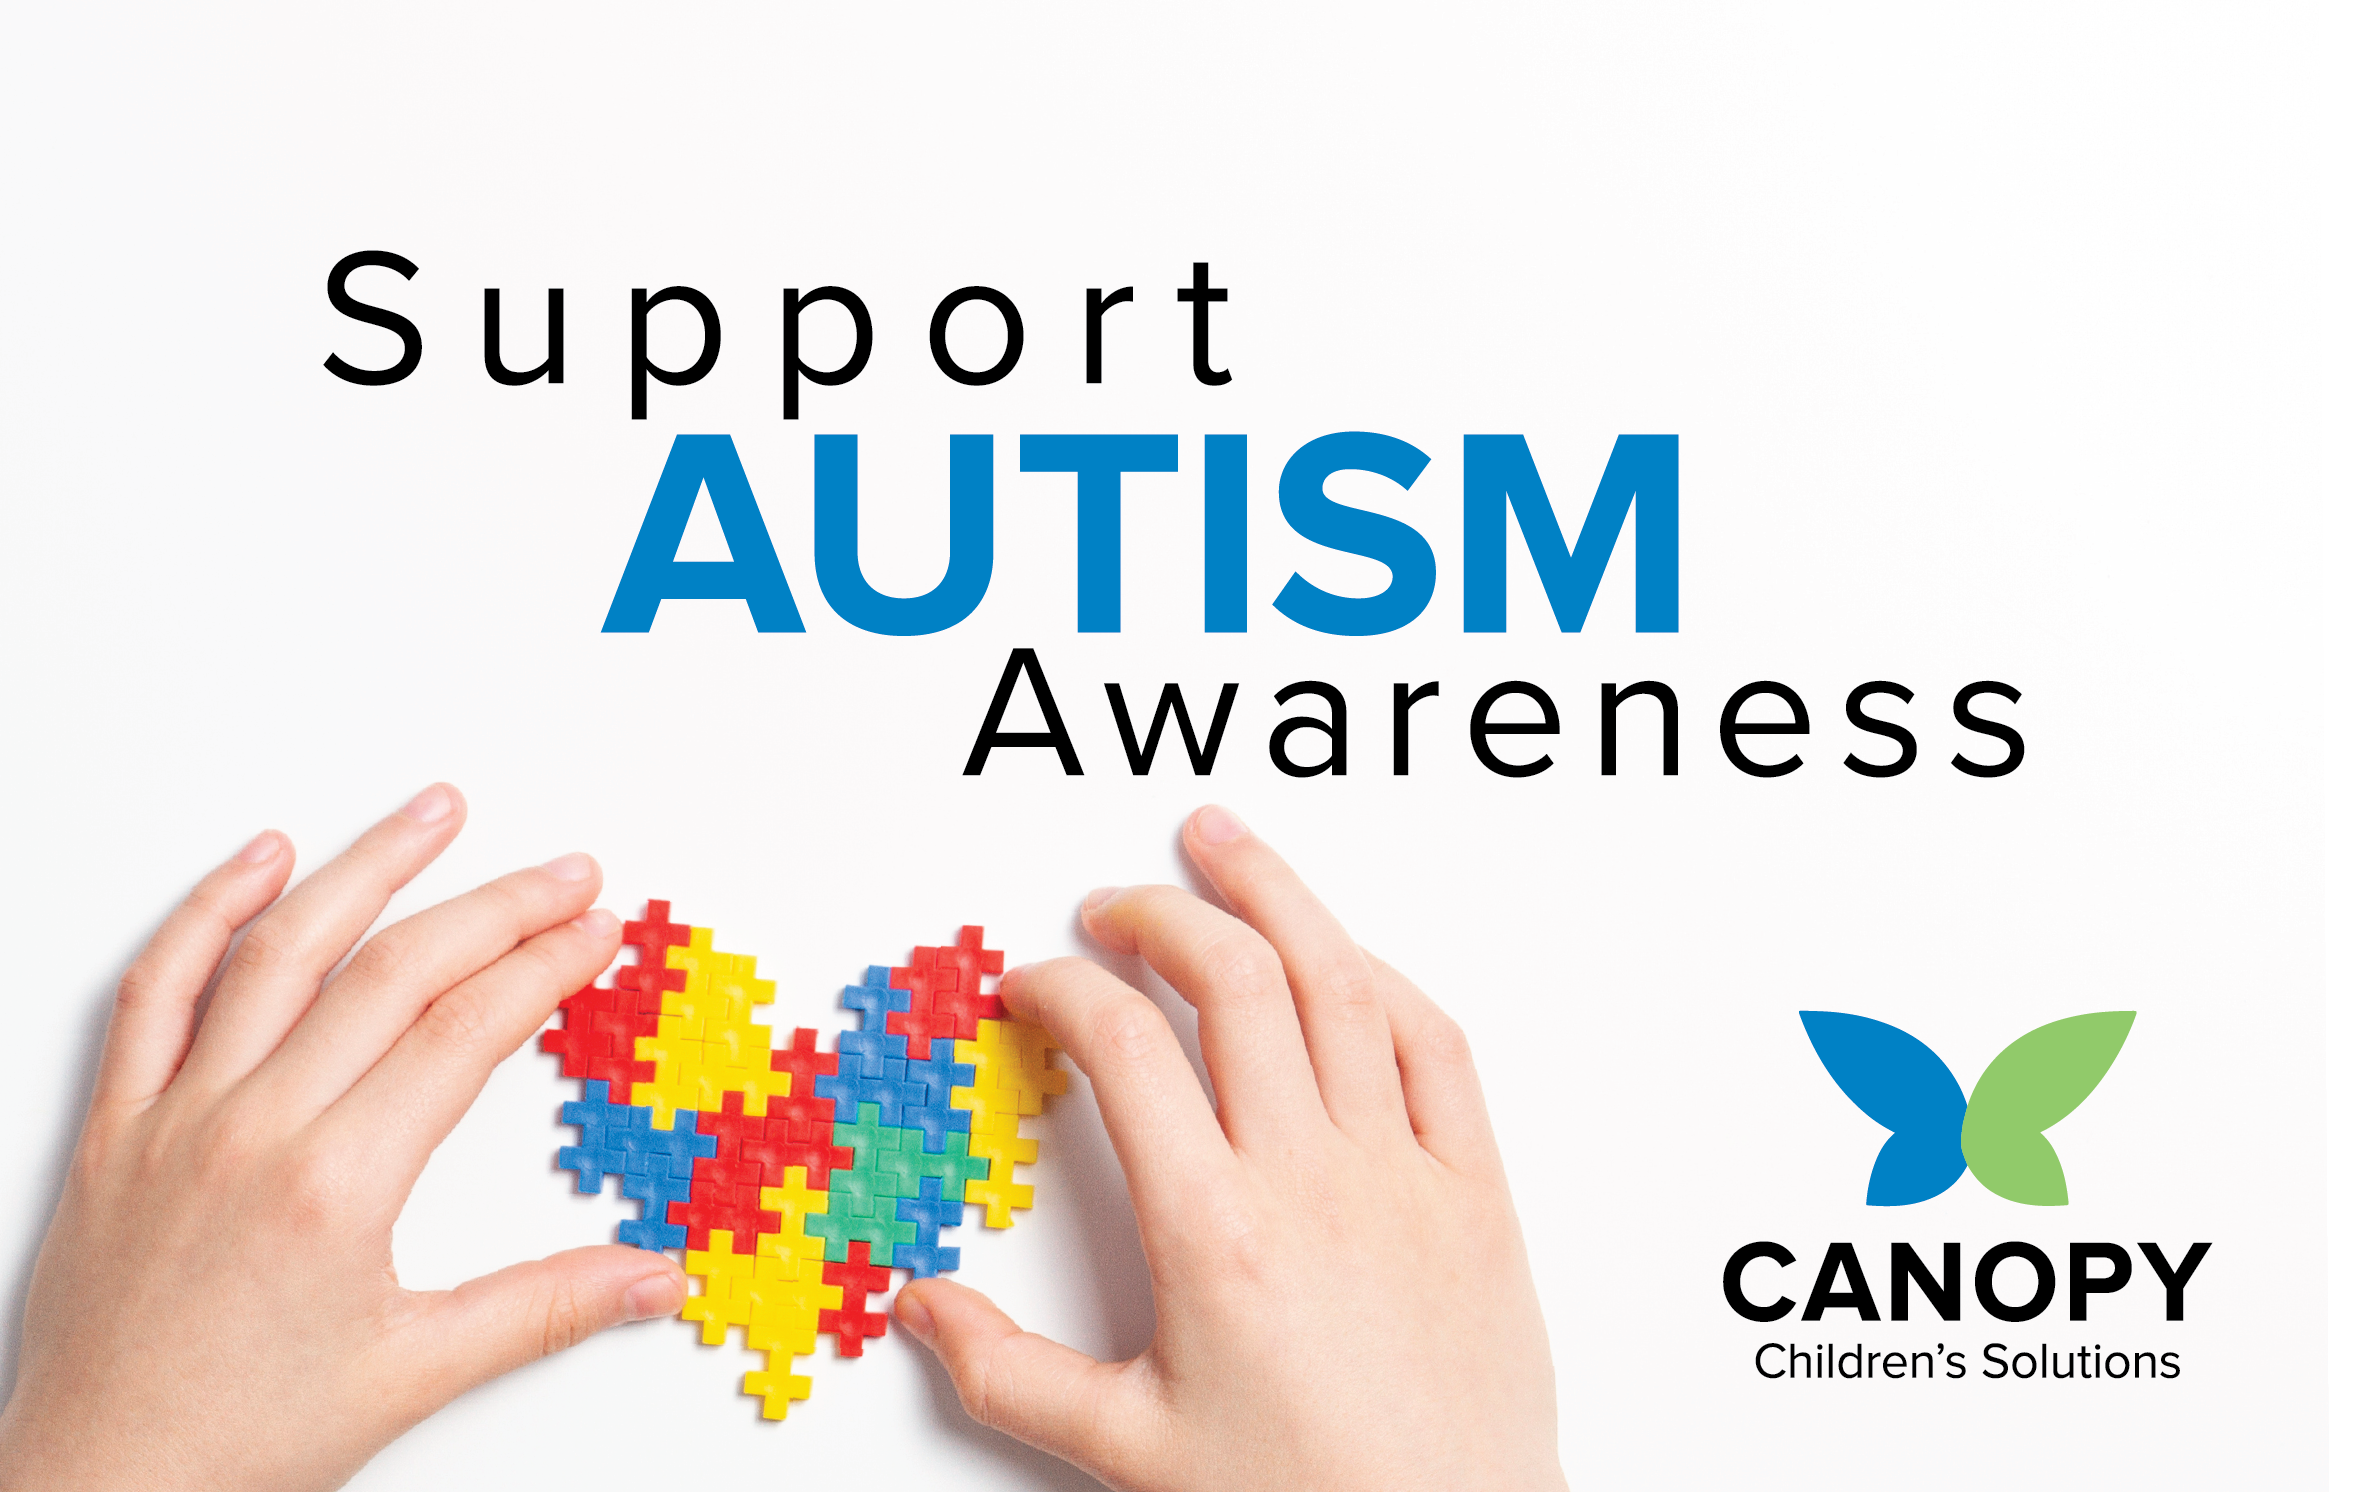 A Special Day of Giving – World Autism Day